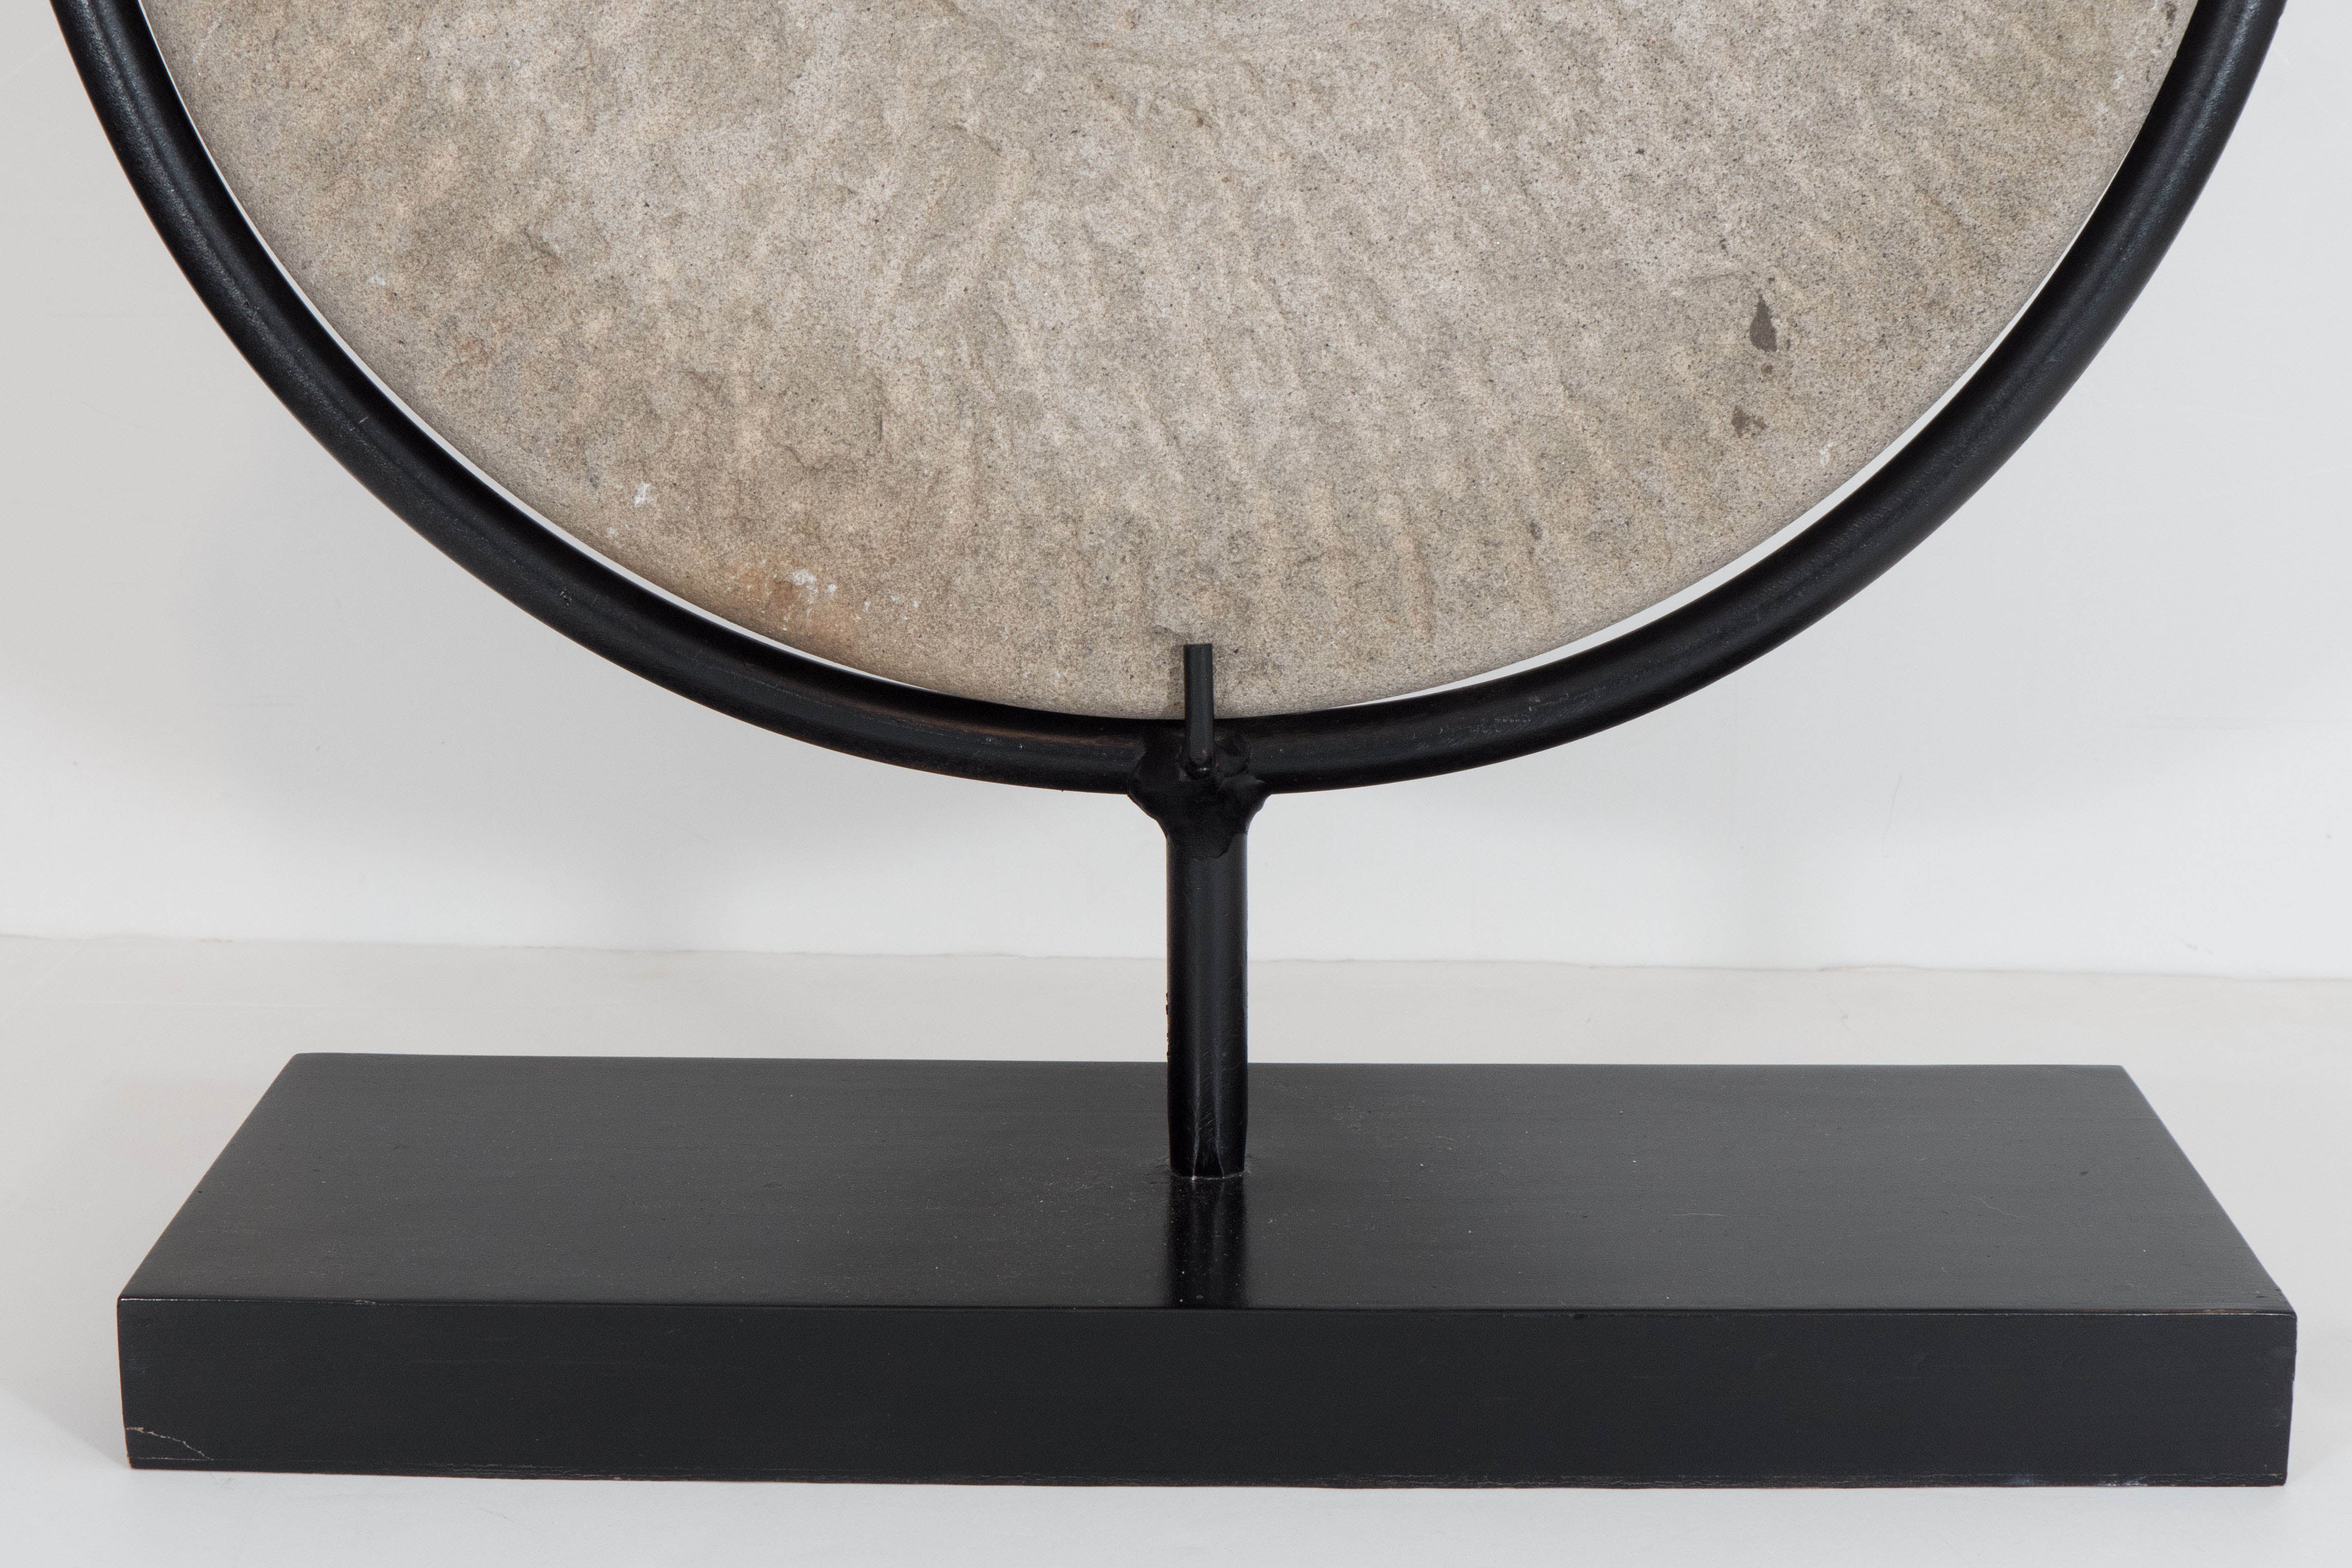 An antique Chinese millstone, otherwise stone grinding wheel, produced and utilized, circa late 19th century, the wheel stands upright on a decorative display. Good antique condition, marks and wear consistent with age and use.